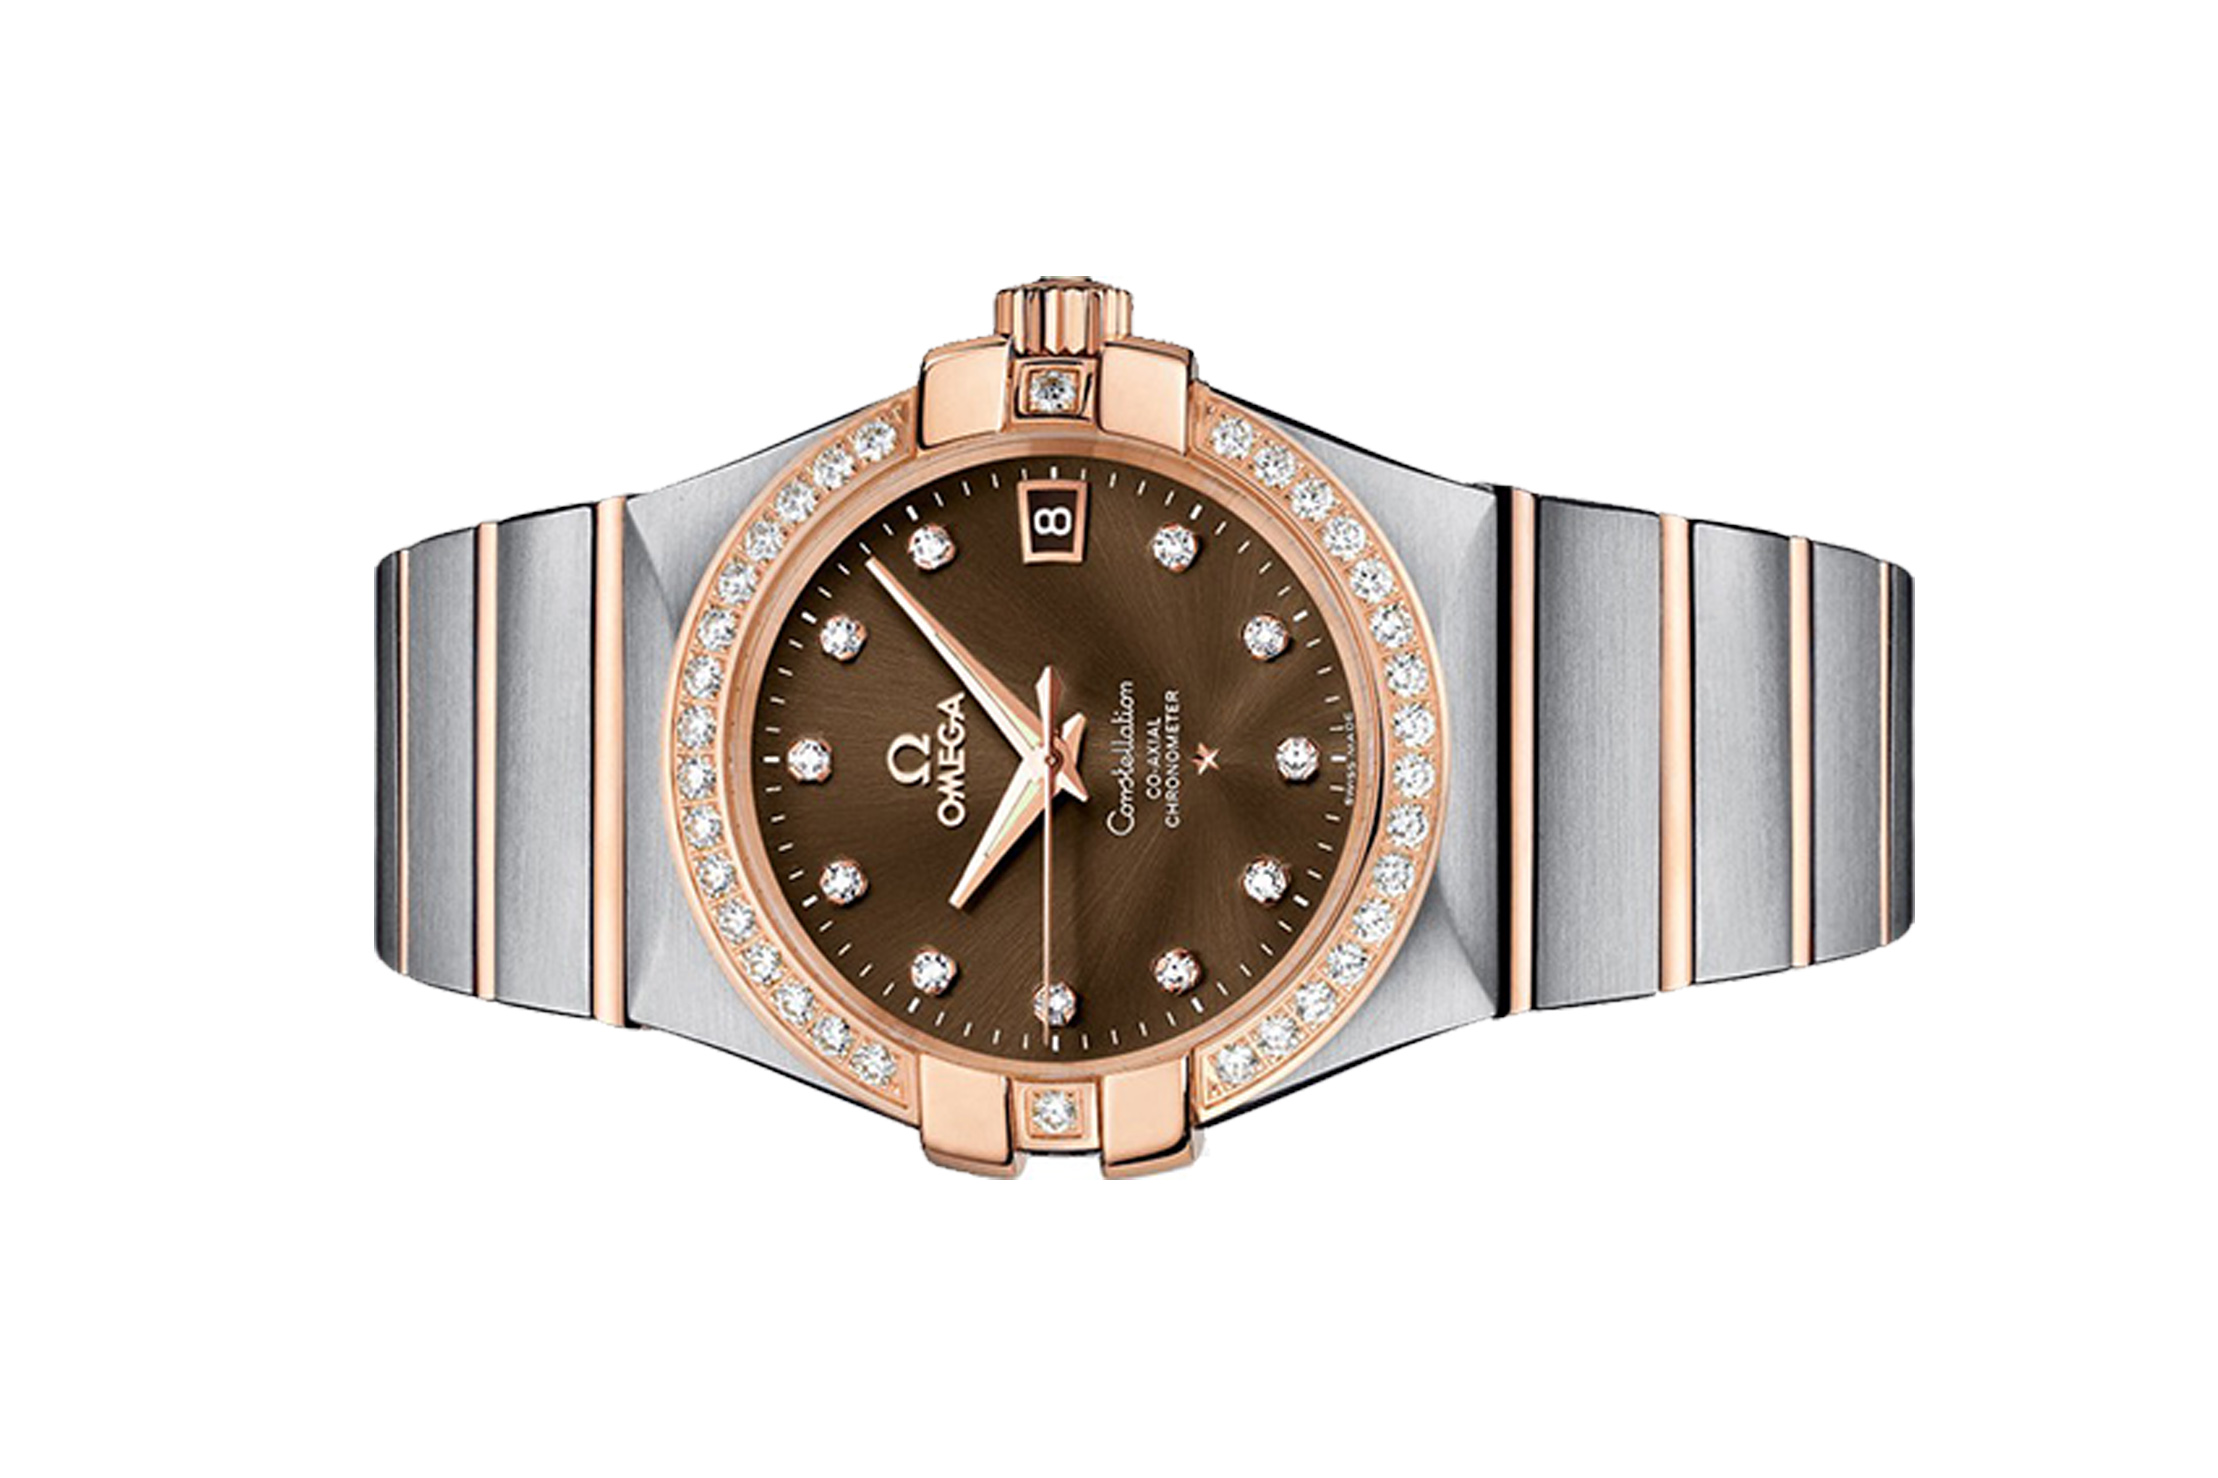 Đồng Hồ Omega Constellation Co-Axial 123.25.35.20.63.001